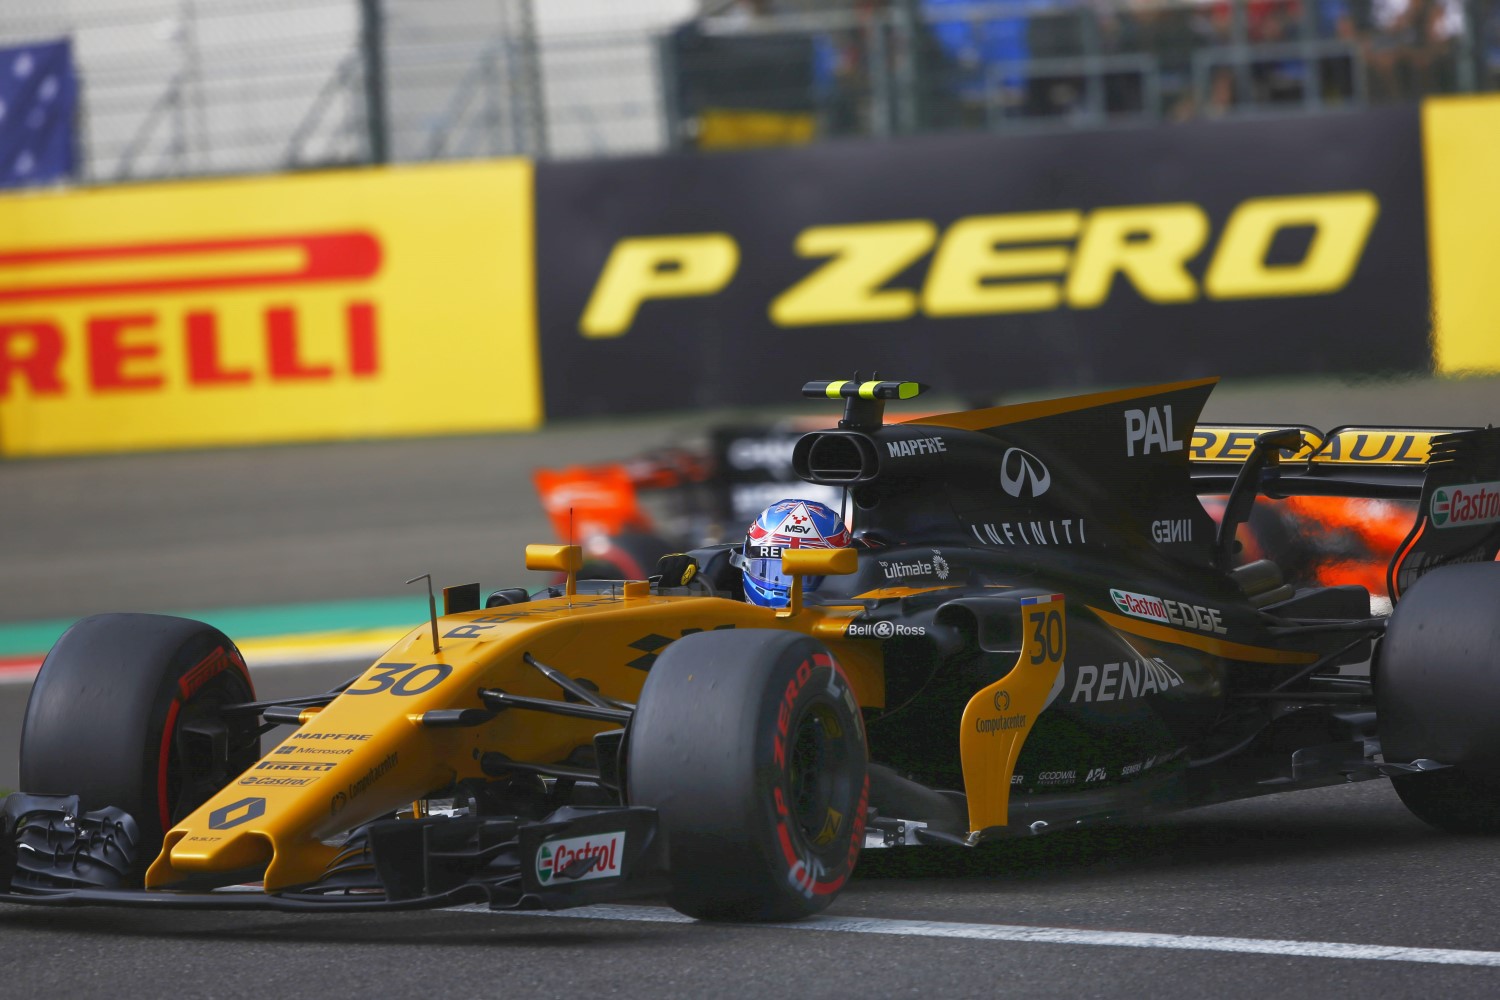 Palmer in the Renault at Spa - he was fast